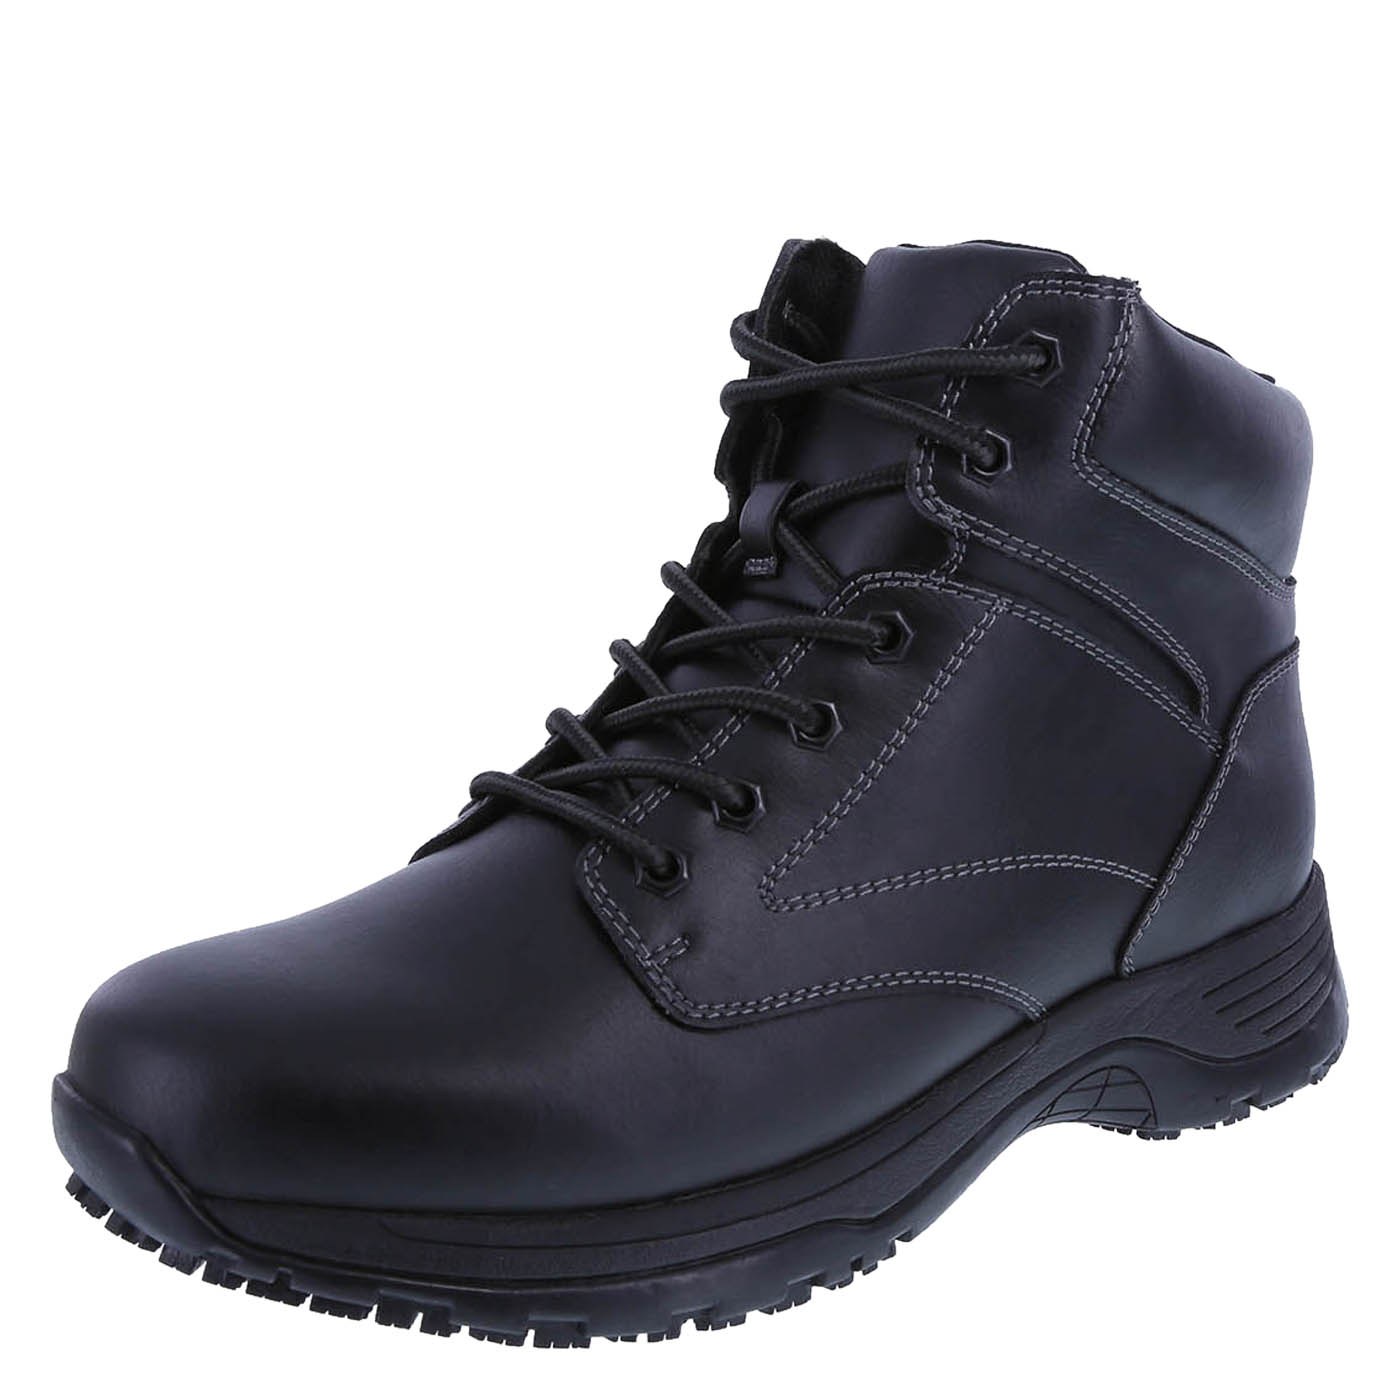 payless mens work shoes